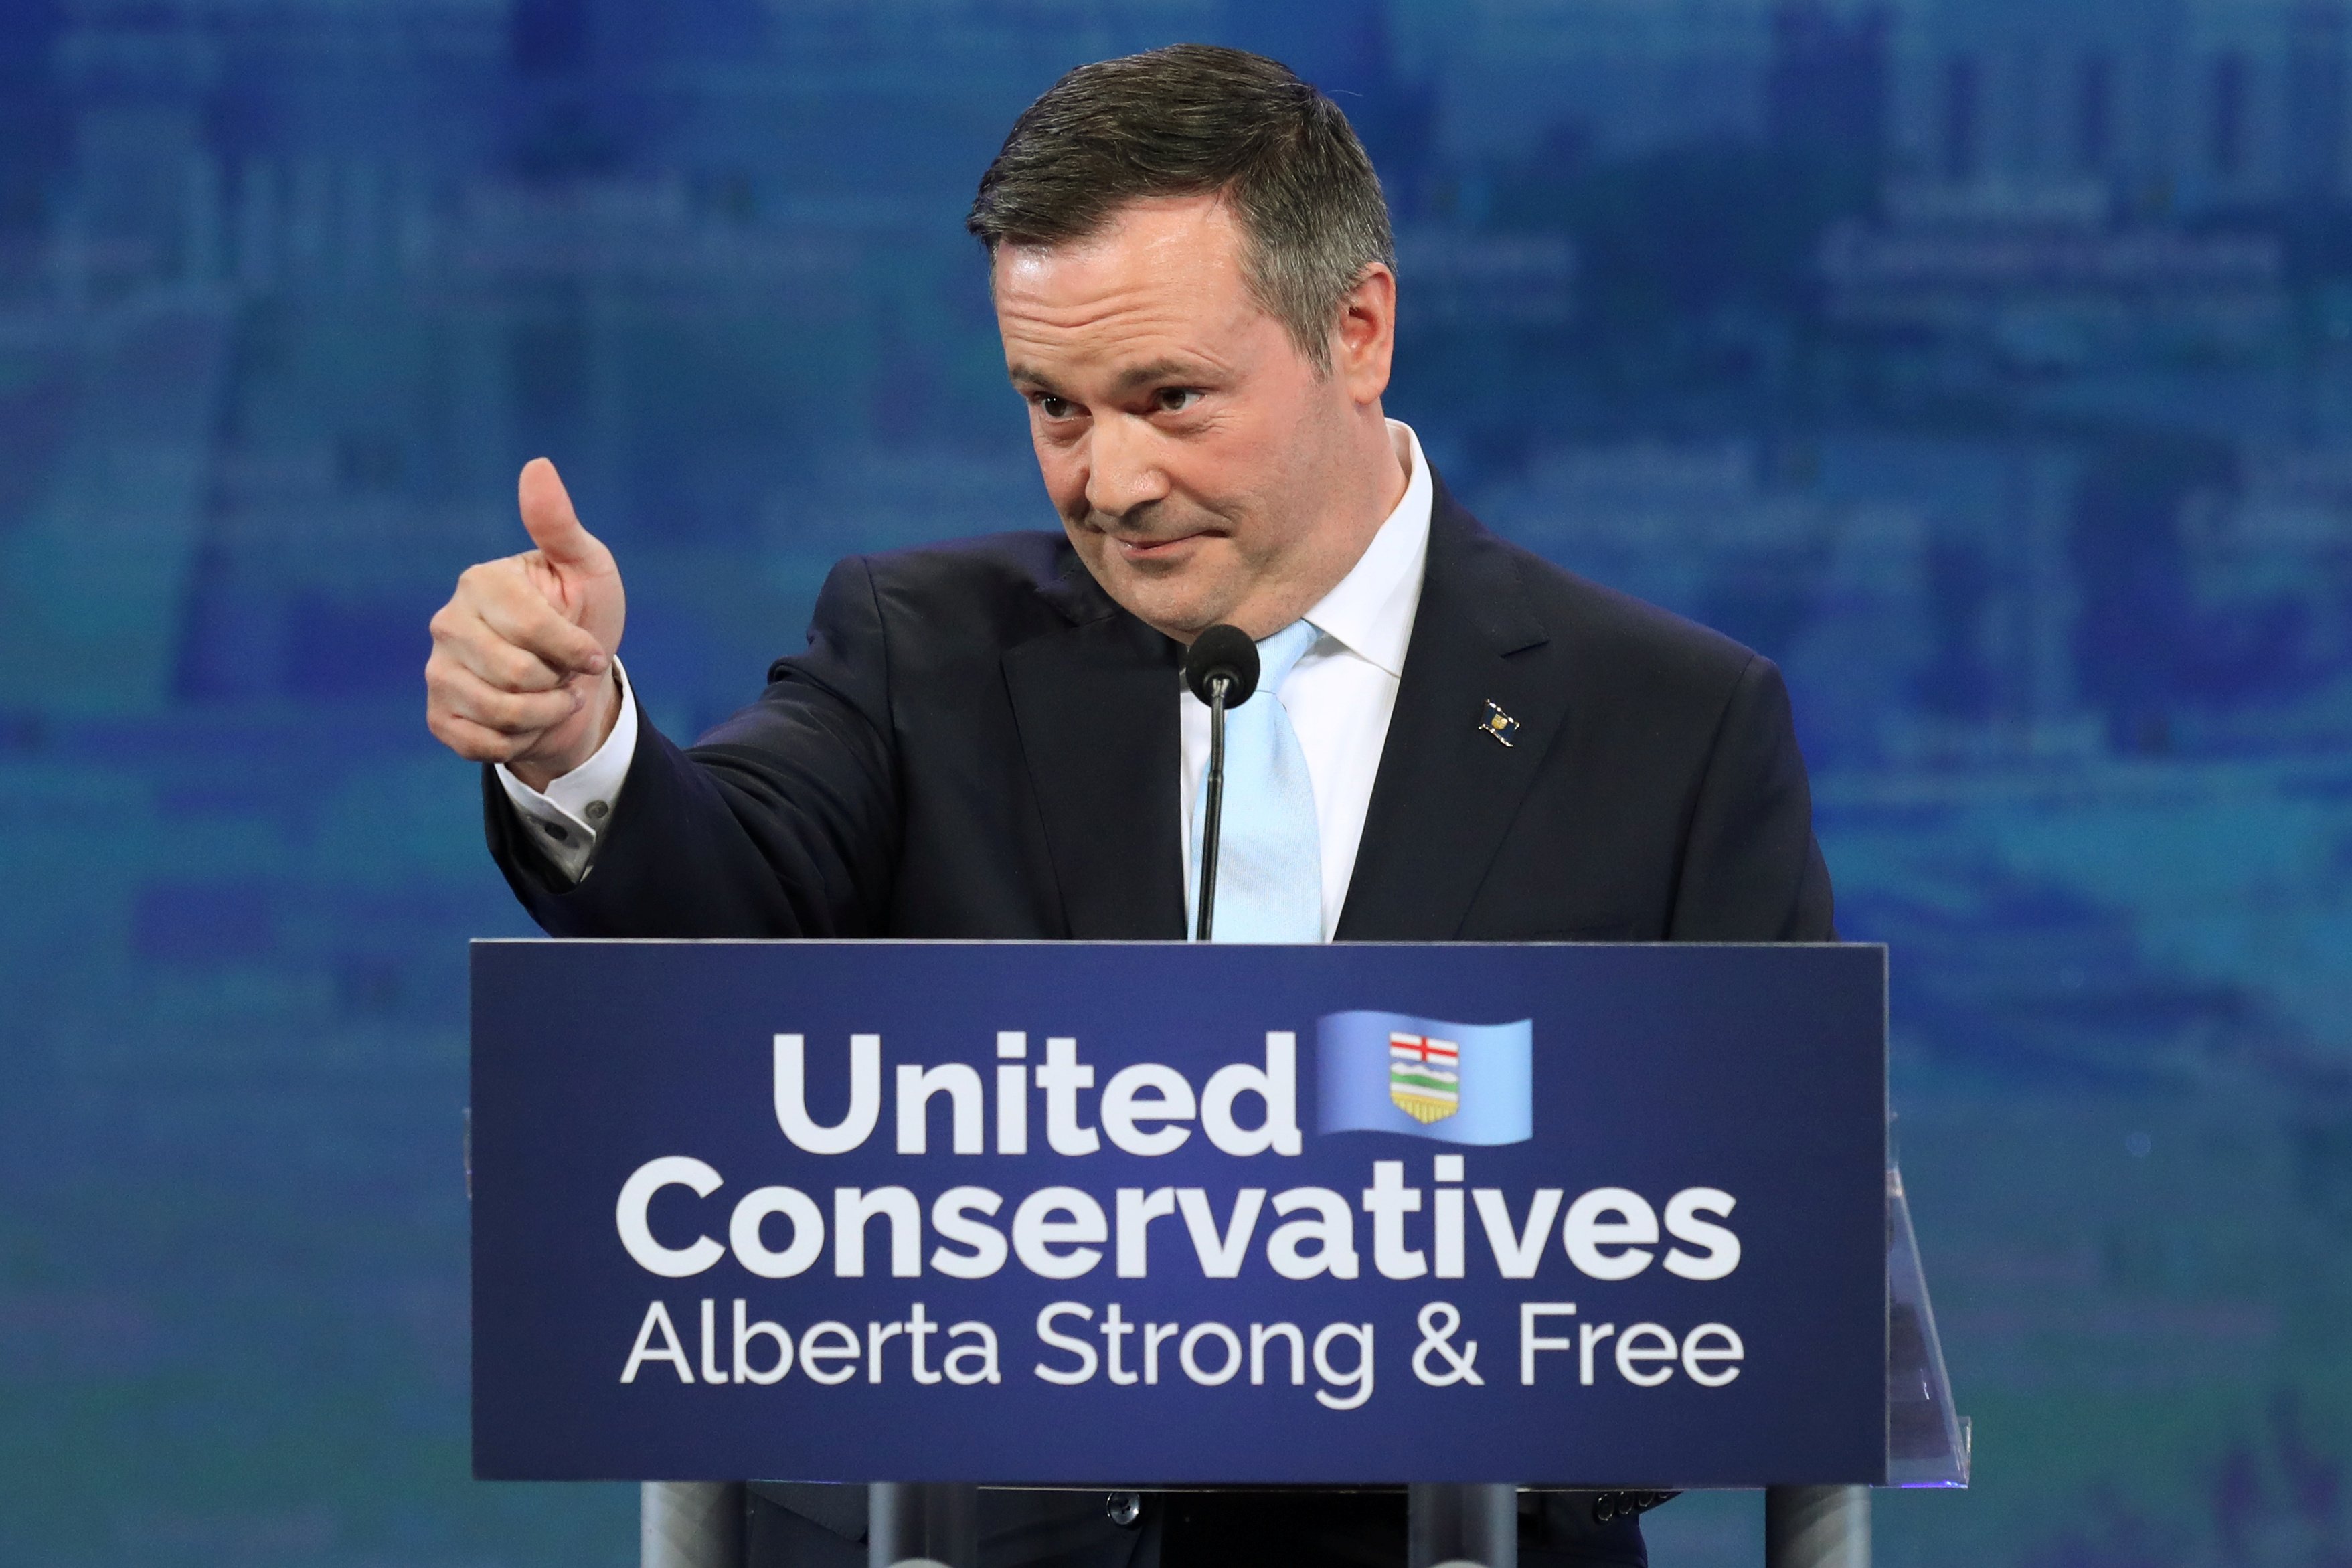 United Conservative Party (UCP) leader Jason Kenney reacts at his provincial election night headquarters in Calgary, Alberta, Canada April 16, 2019. REUTERS/Chris Wattie